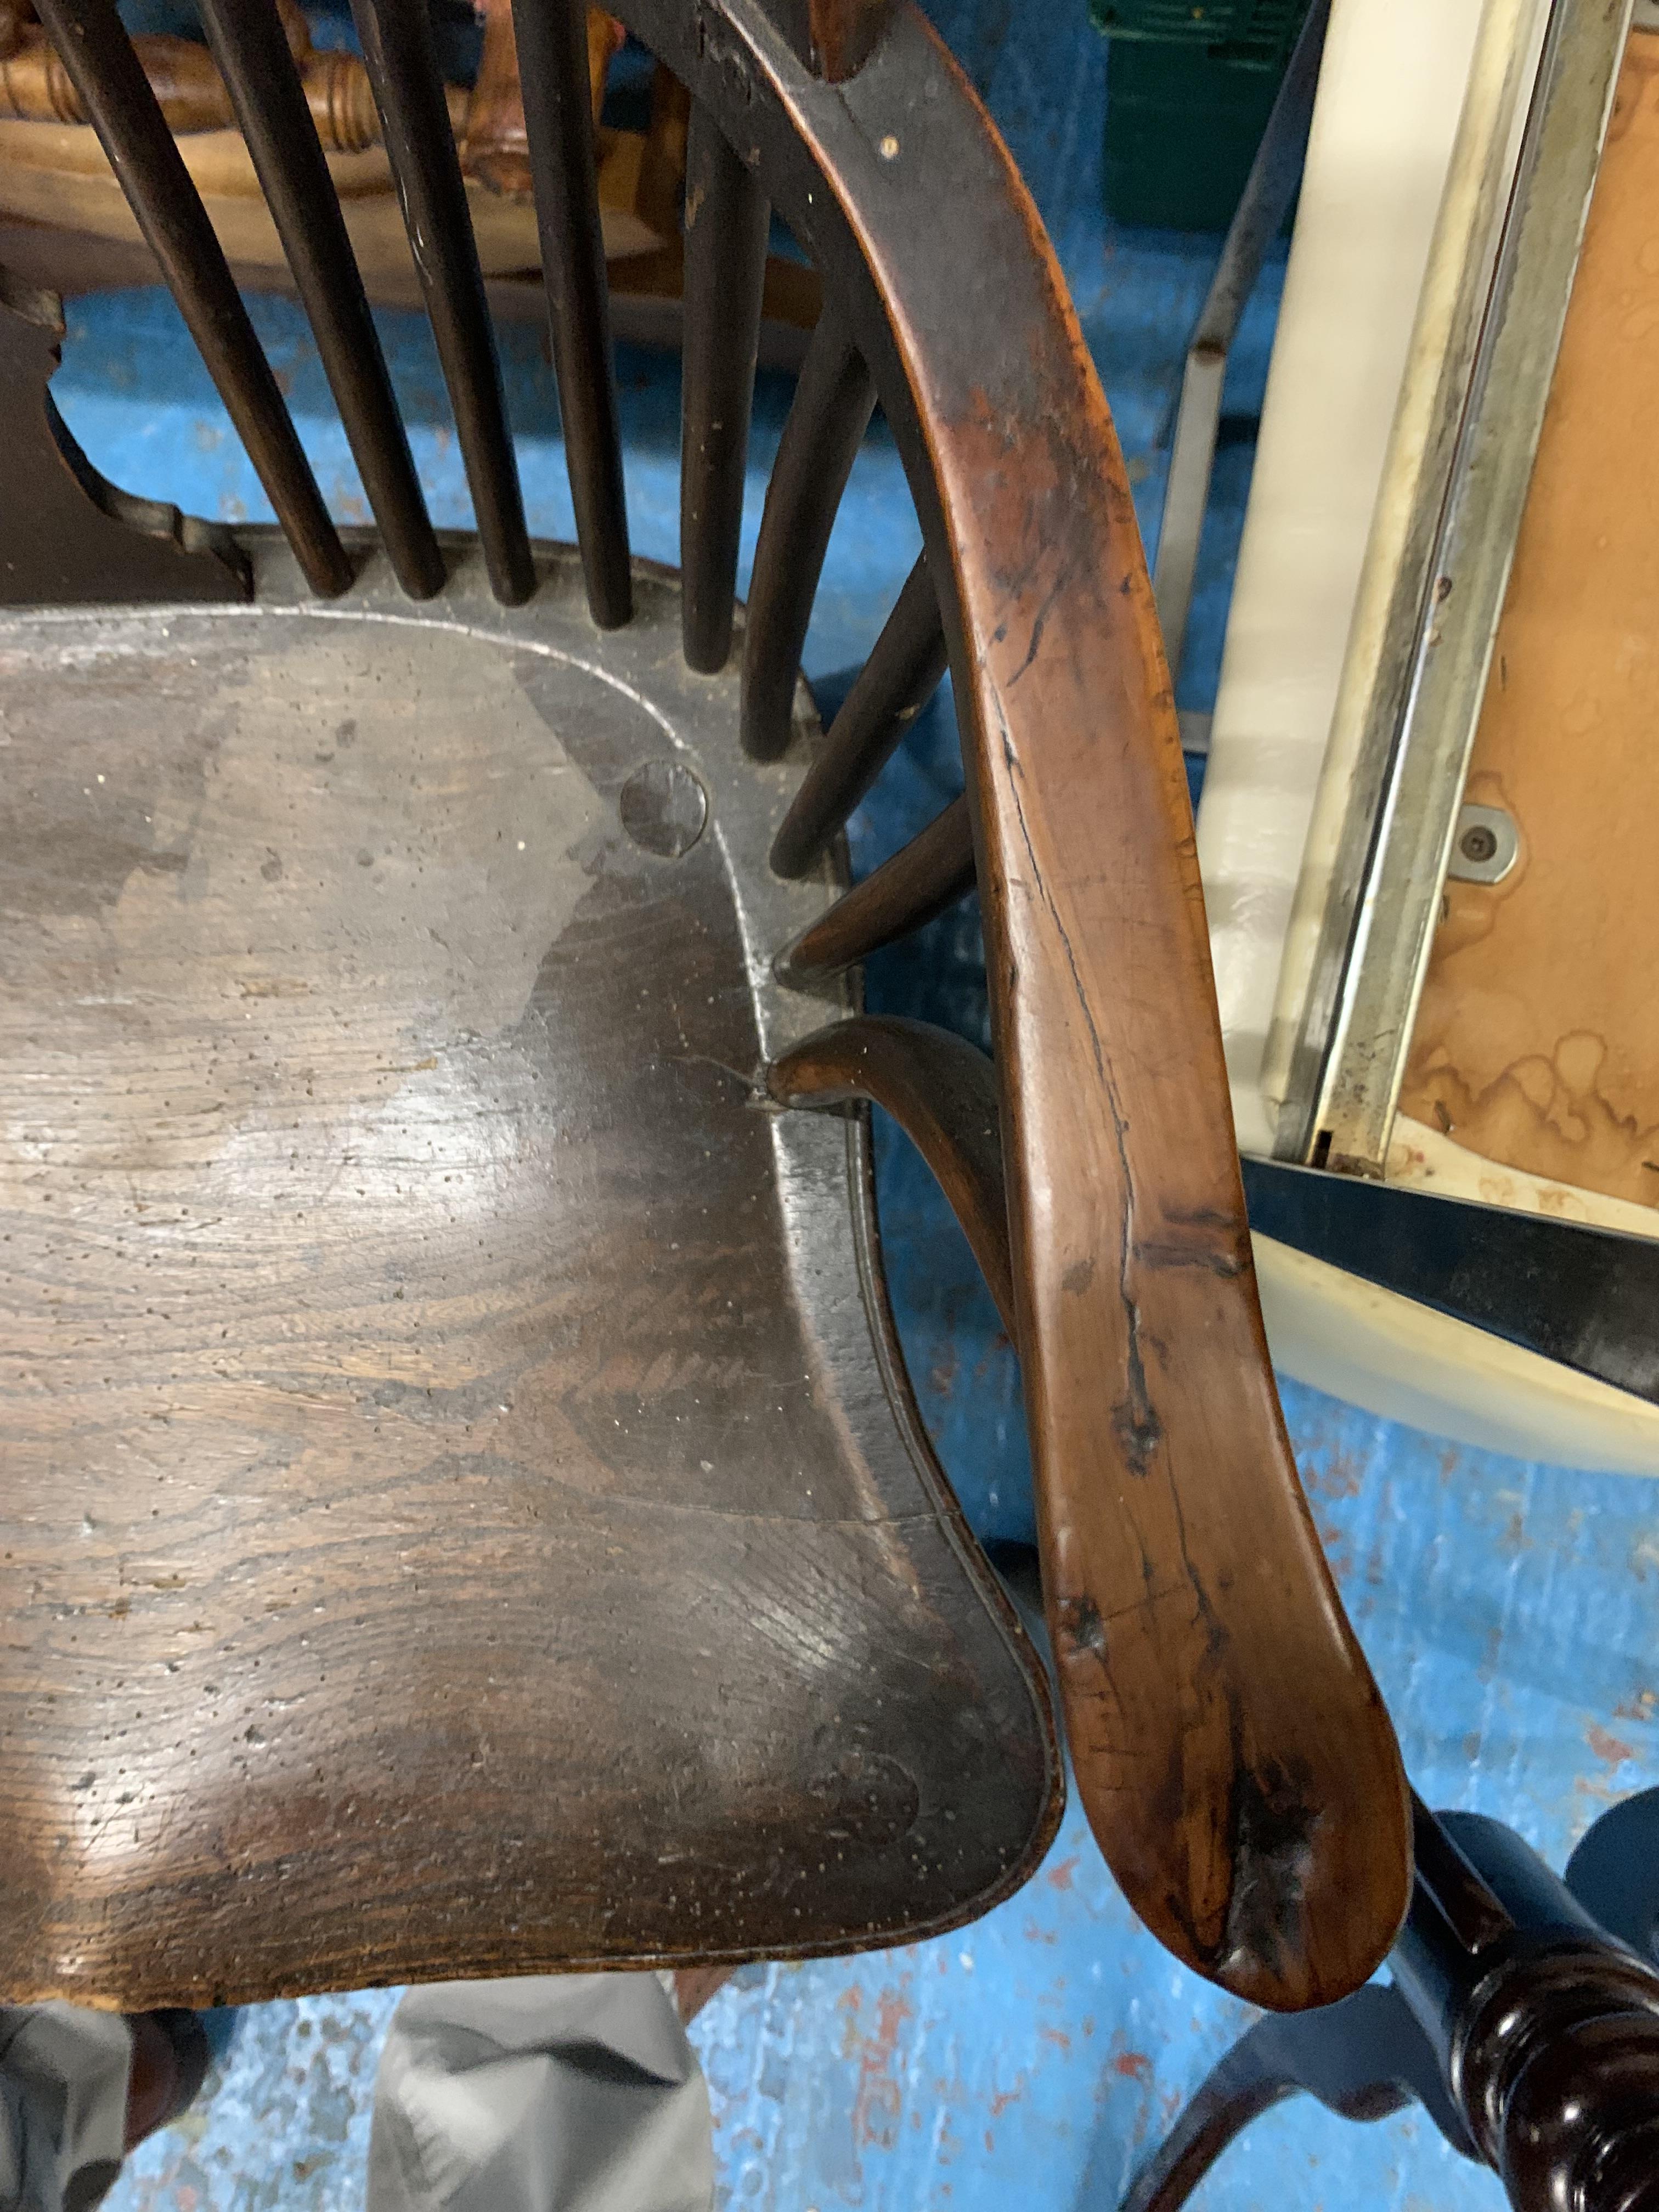 Windsor chair - Image 7 of 38